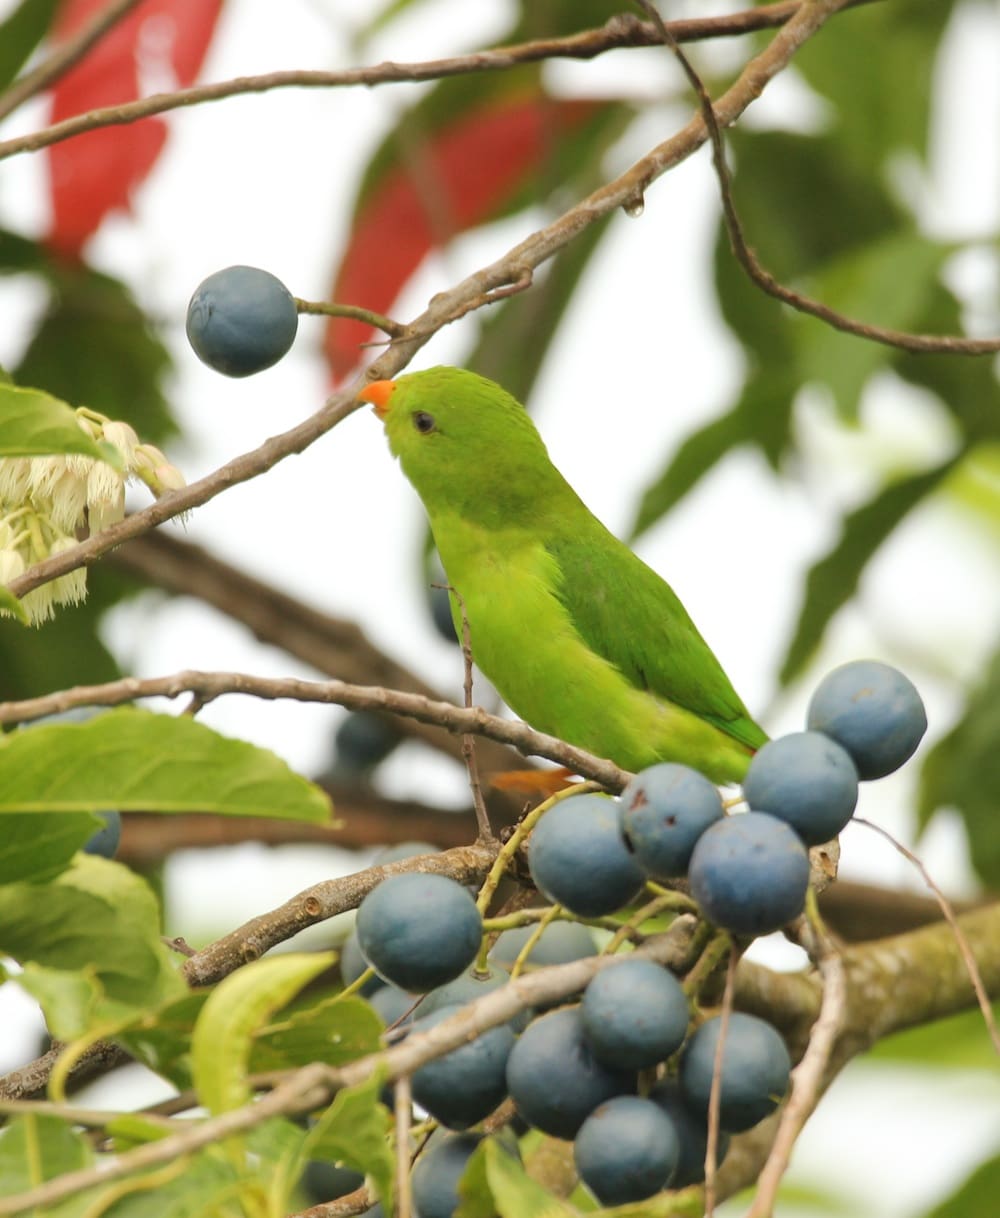 Blue berries on the menu for this Vernal Hanging Parrot